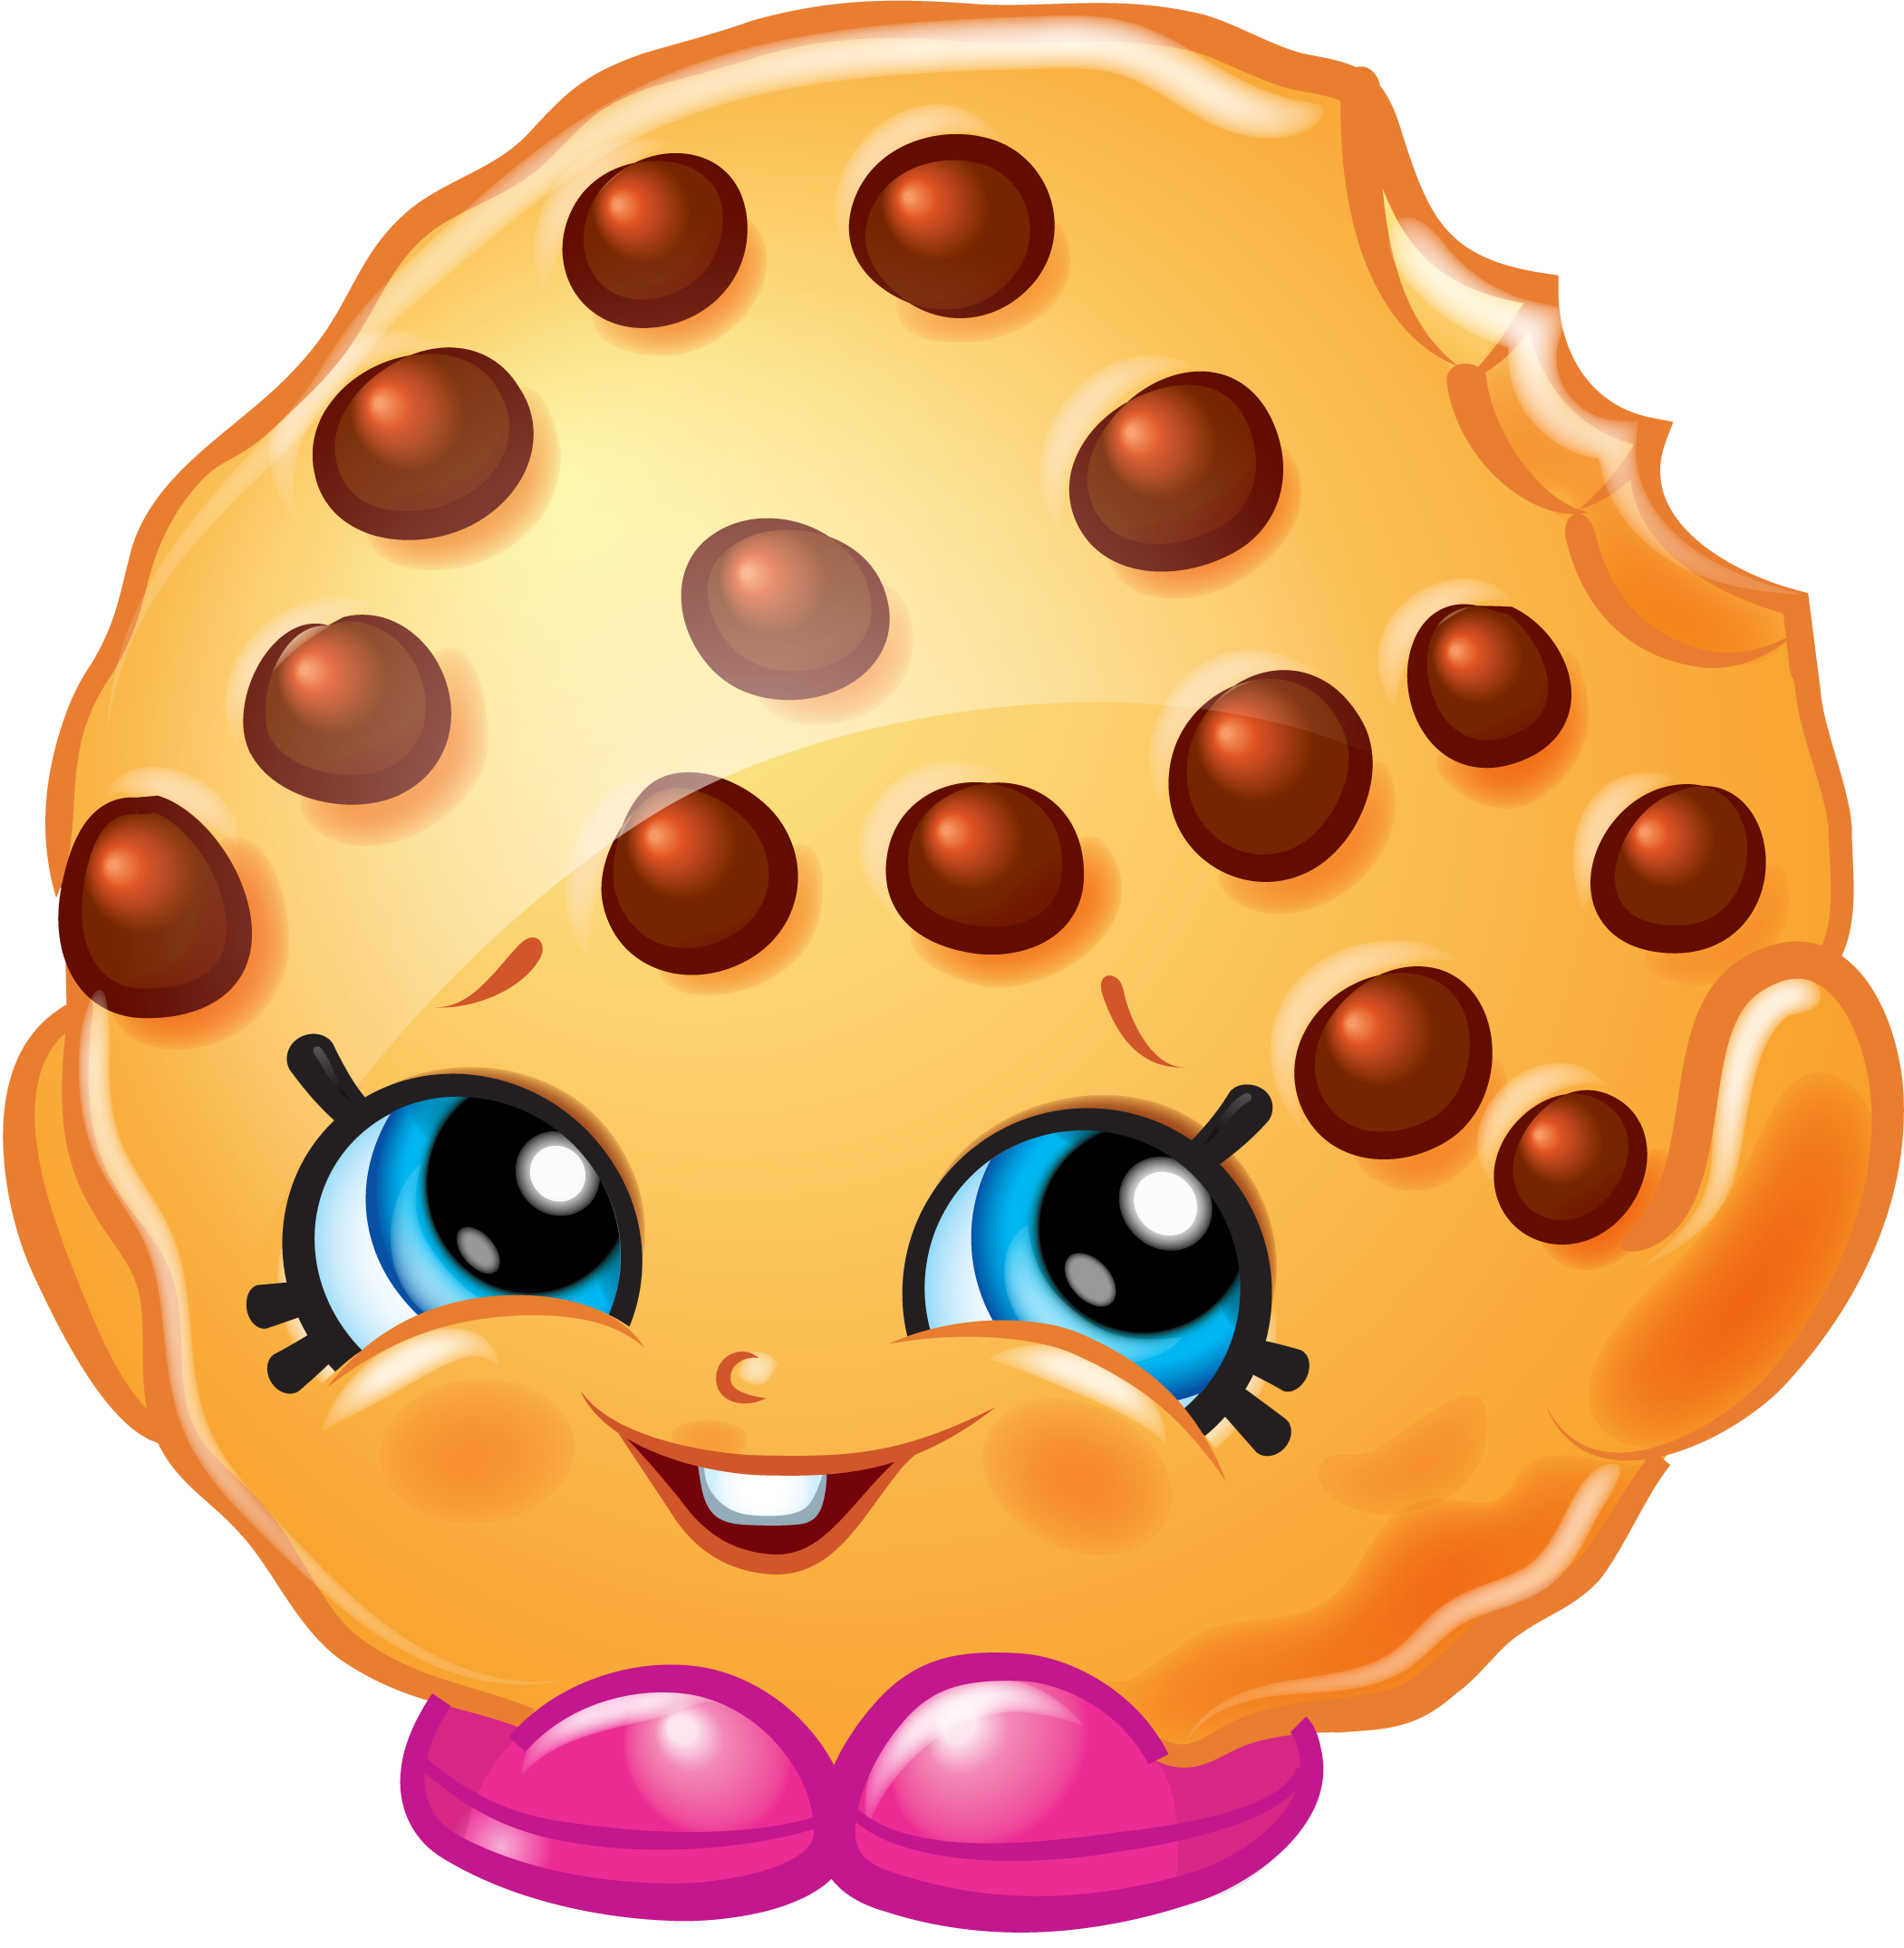 Watermelon clipart shopkins.  collection of cookie